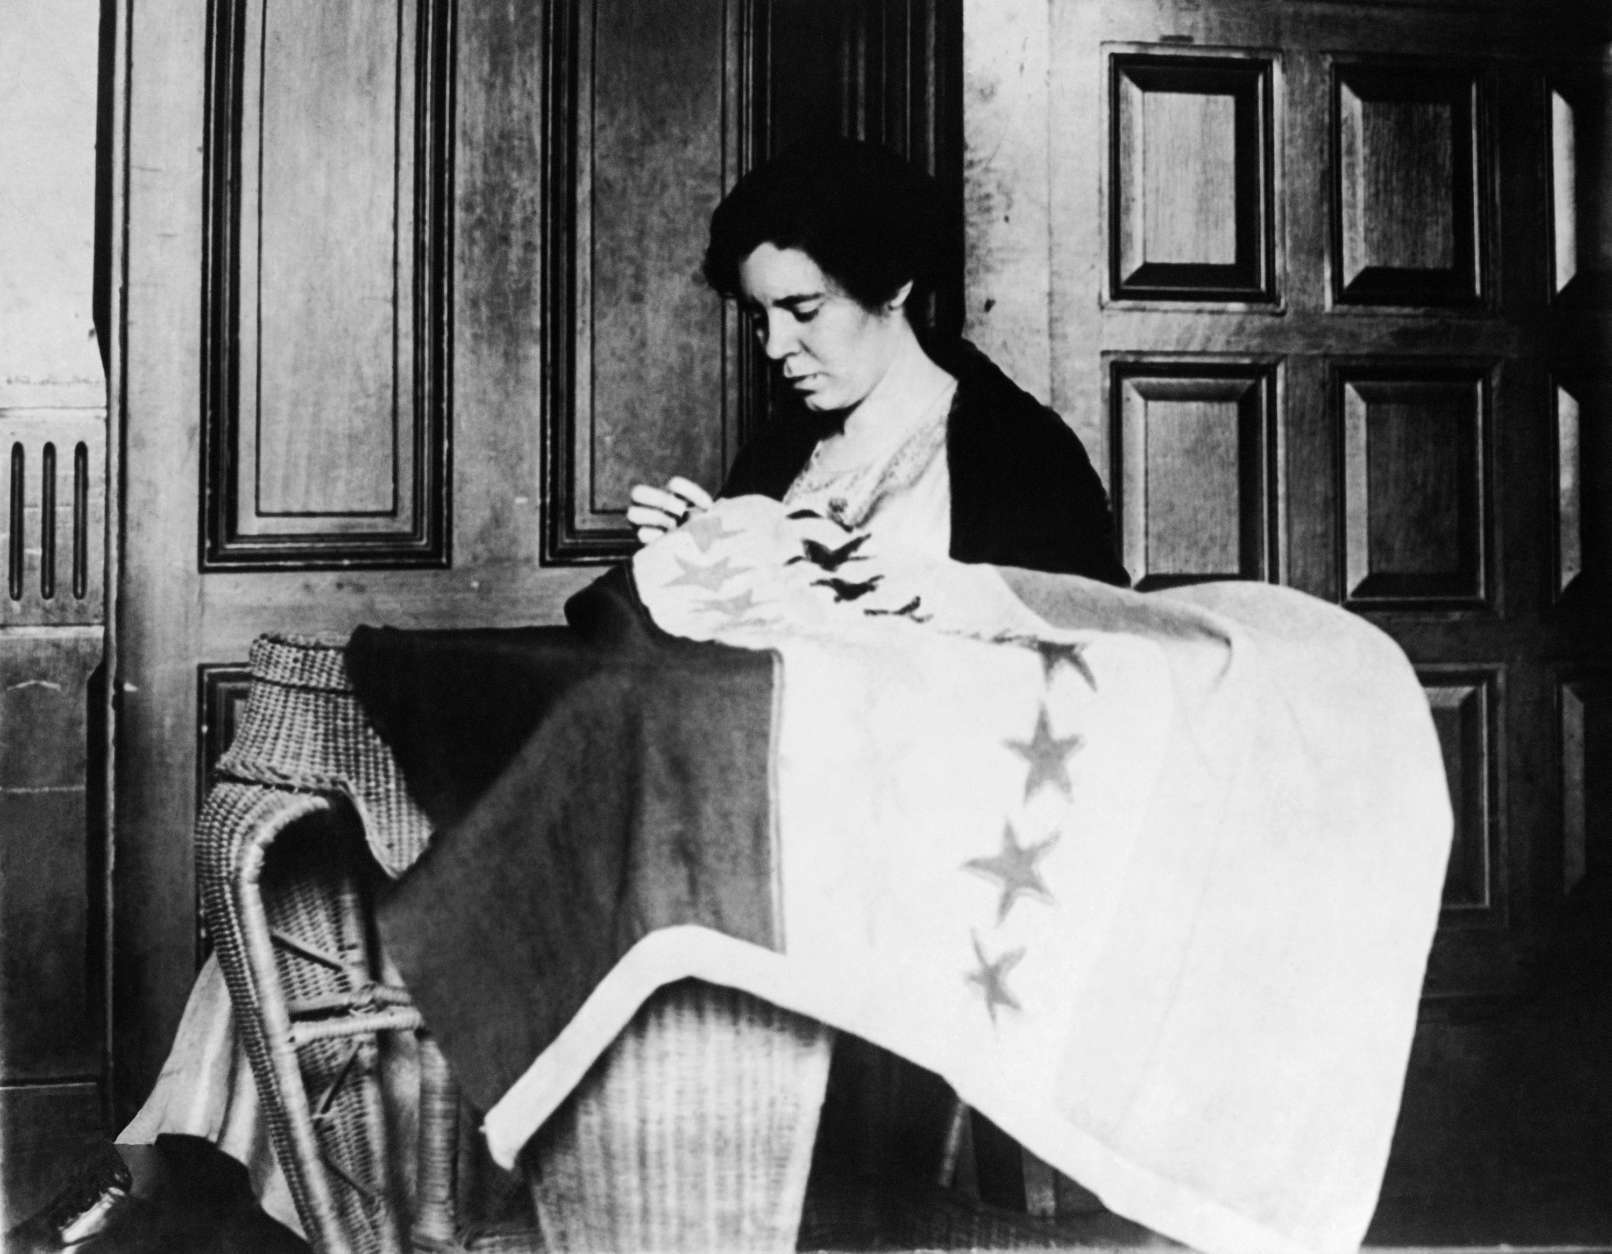 Alice Paul, Chairman of the Nation Women's Party, takes up needle &amp; thread to put the last stitch in the suffrage banner which now has 36 stars representing the 36 states which ratified the suffrage amendment. circa 1932. (AP Photo)